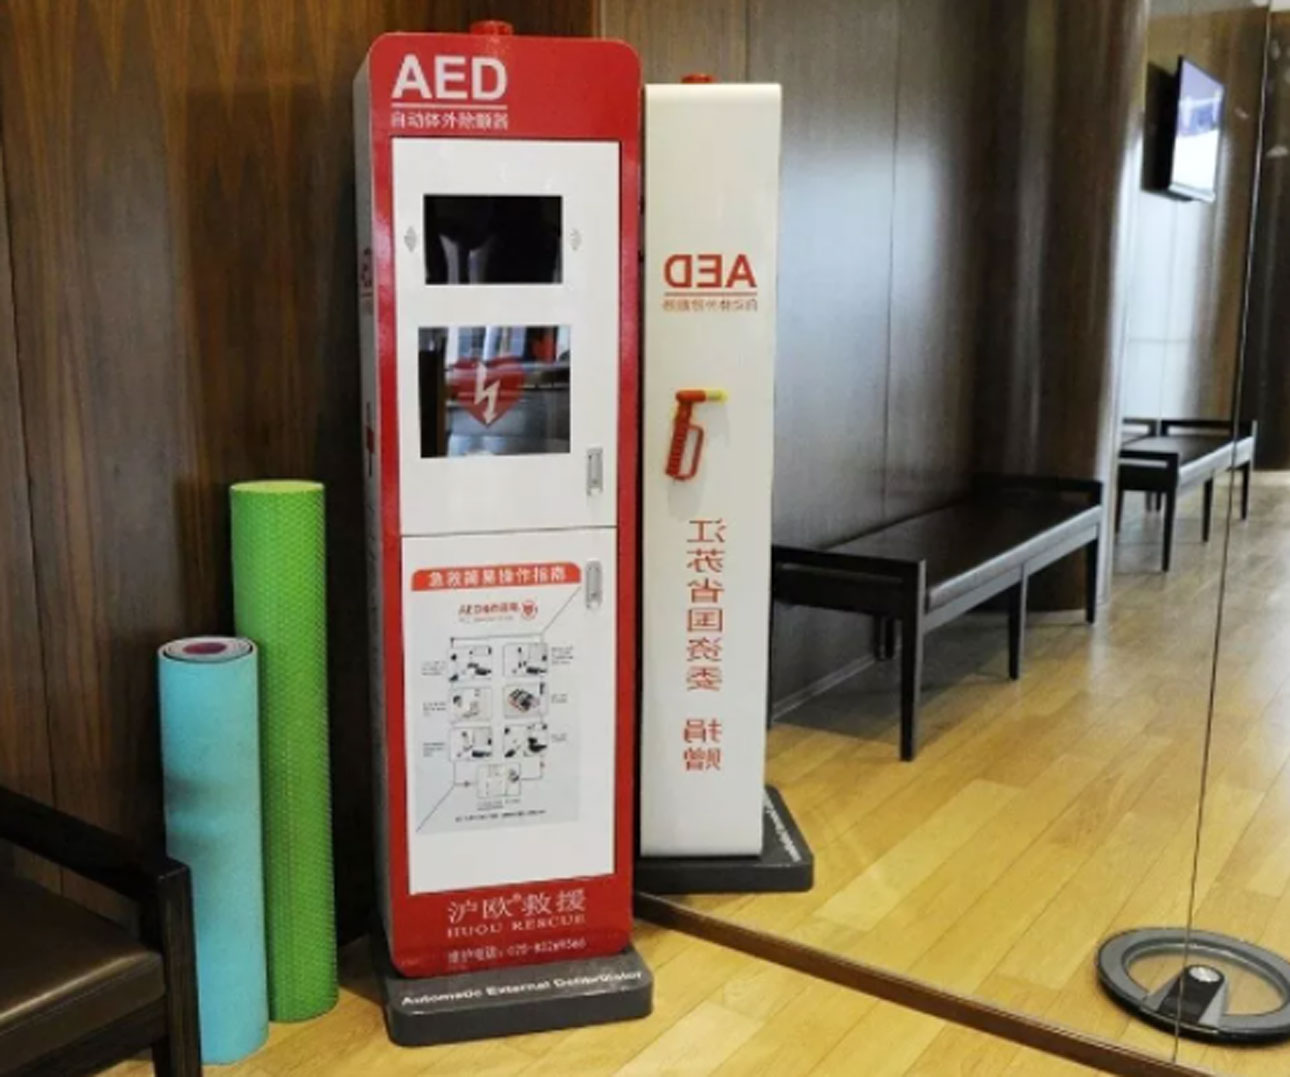 Mindray's AED placed in Jinling Hotel Nanjing